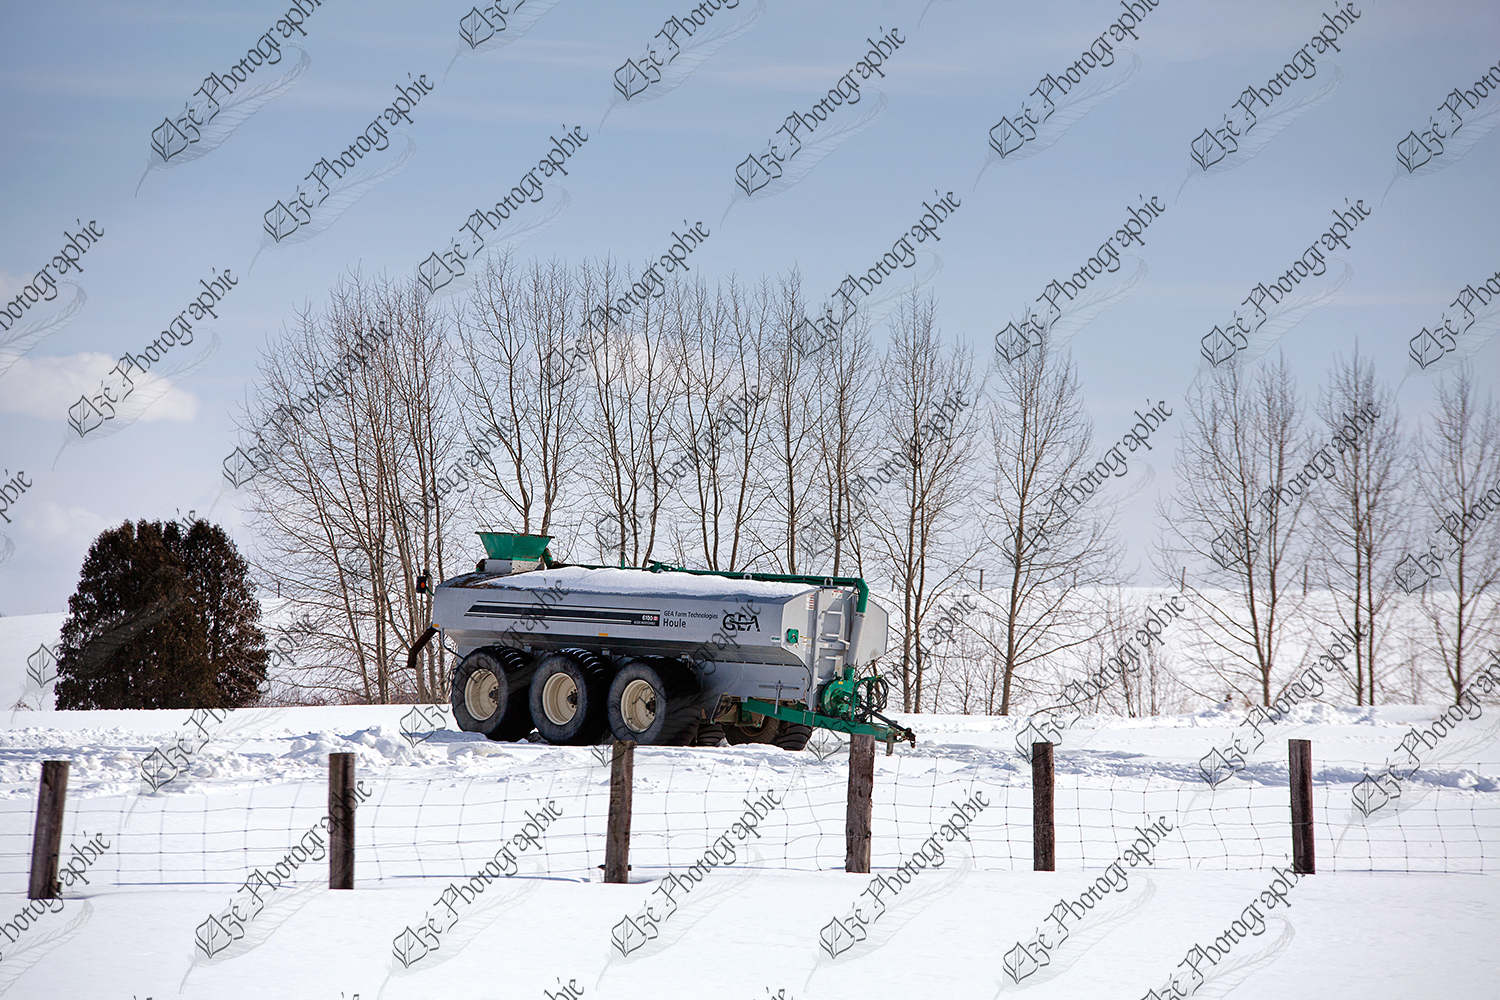 elze_photo_4794_hiver_paturage_reservoir_countryside_winter